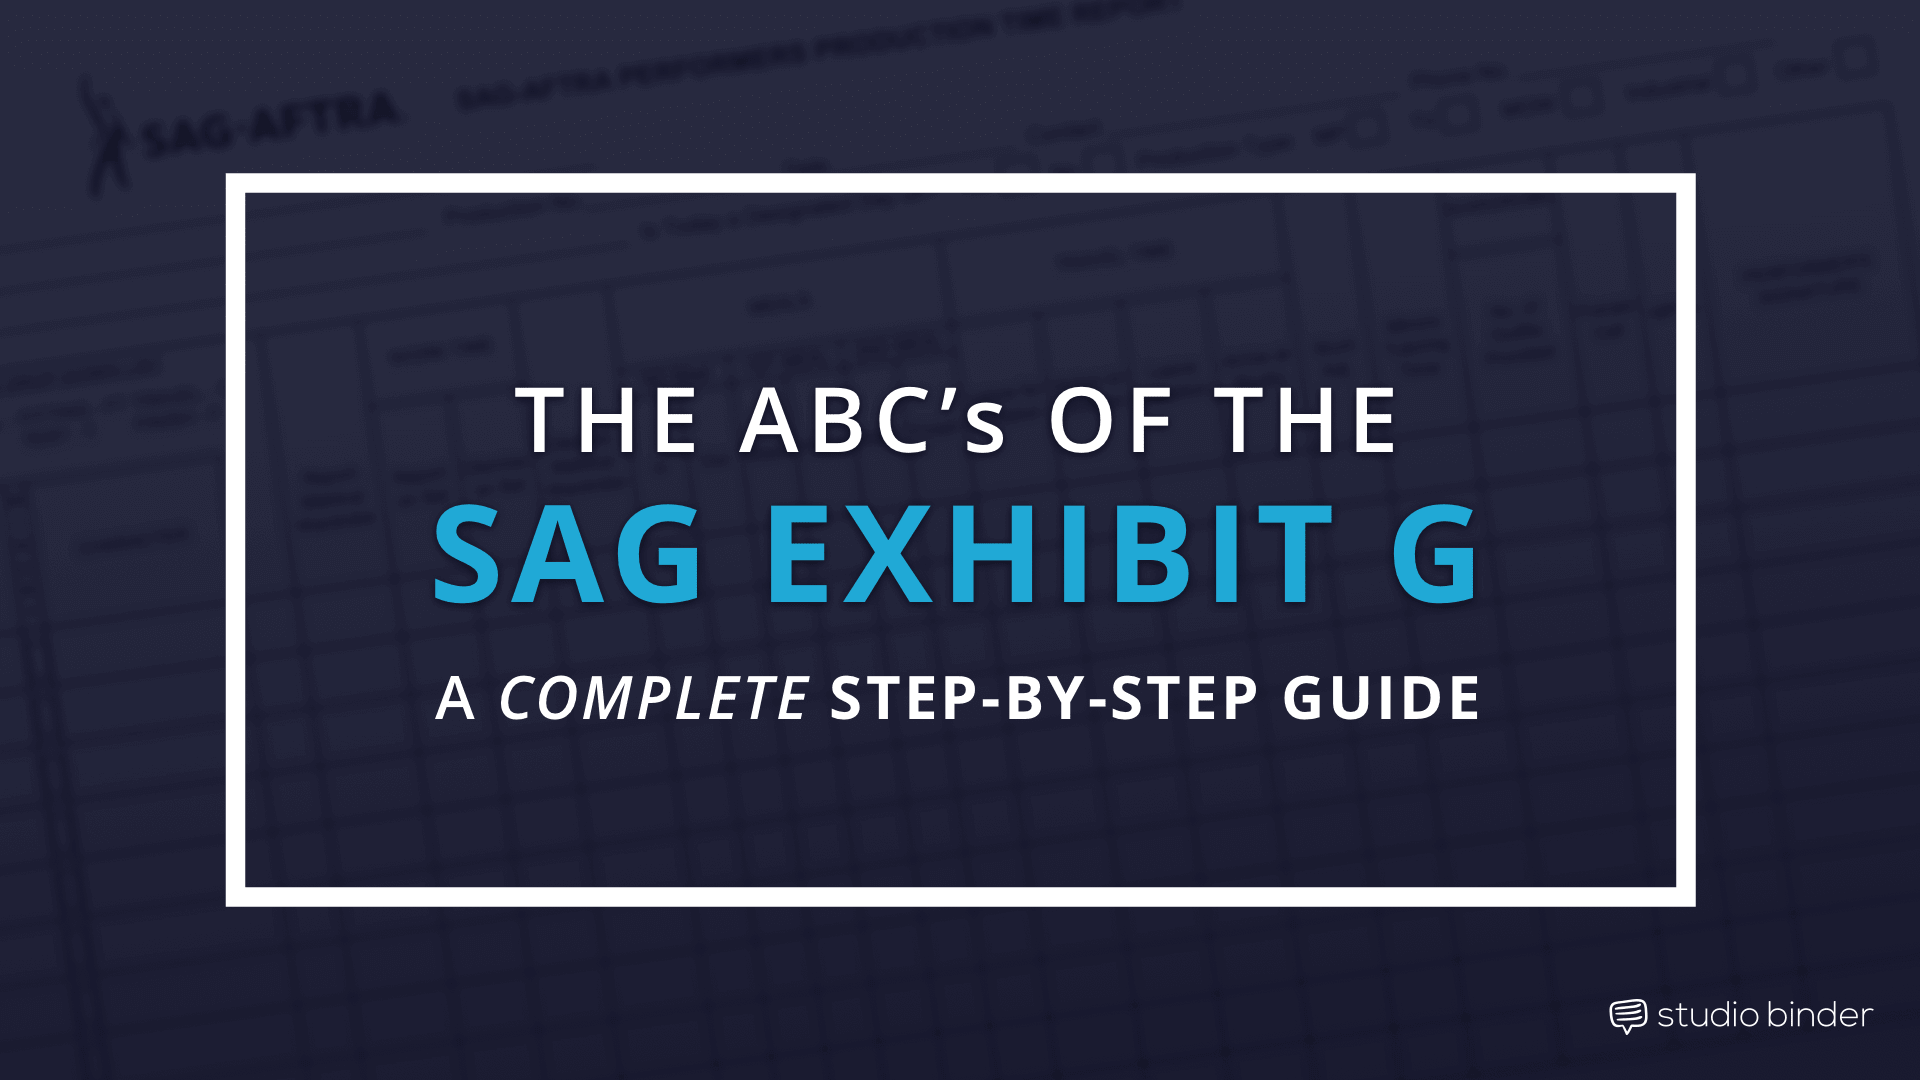 How to Fill Out SAG Exhibit G - A Complete Step-by-Step Guide - StudioBinder - Featured